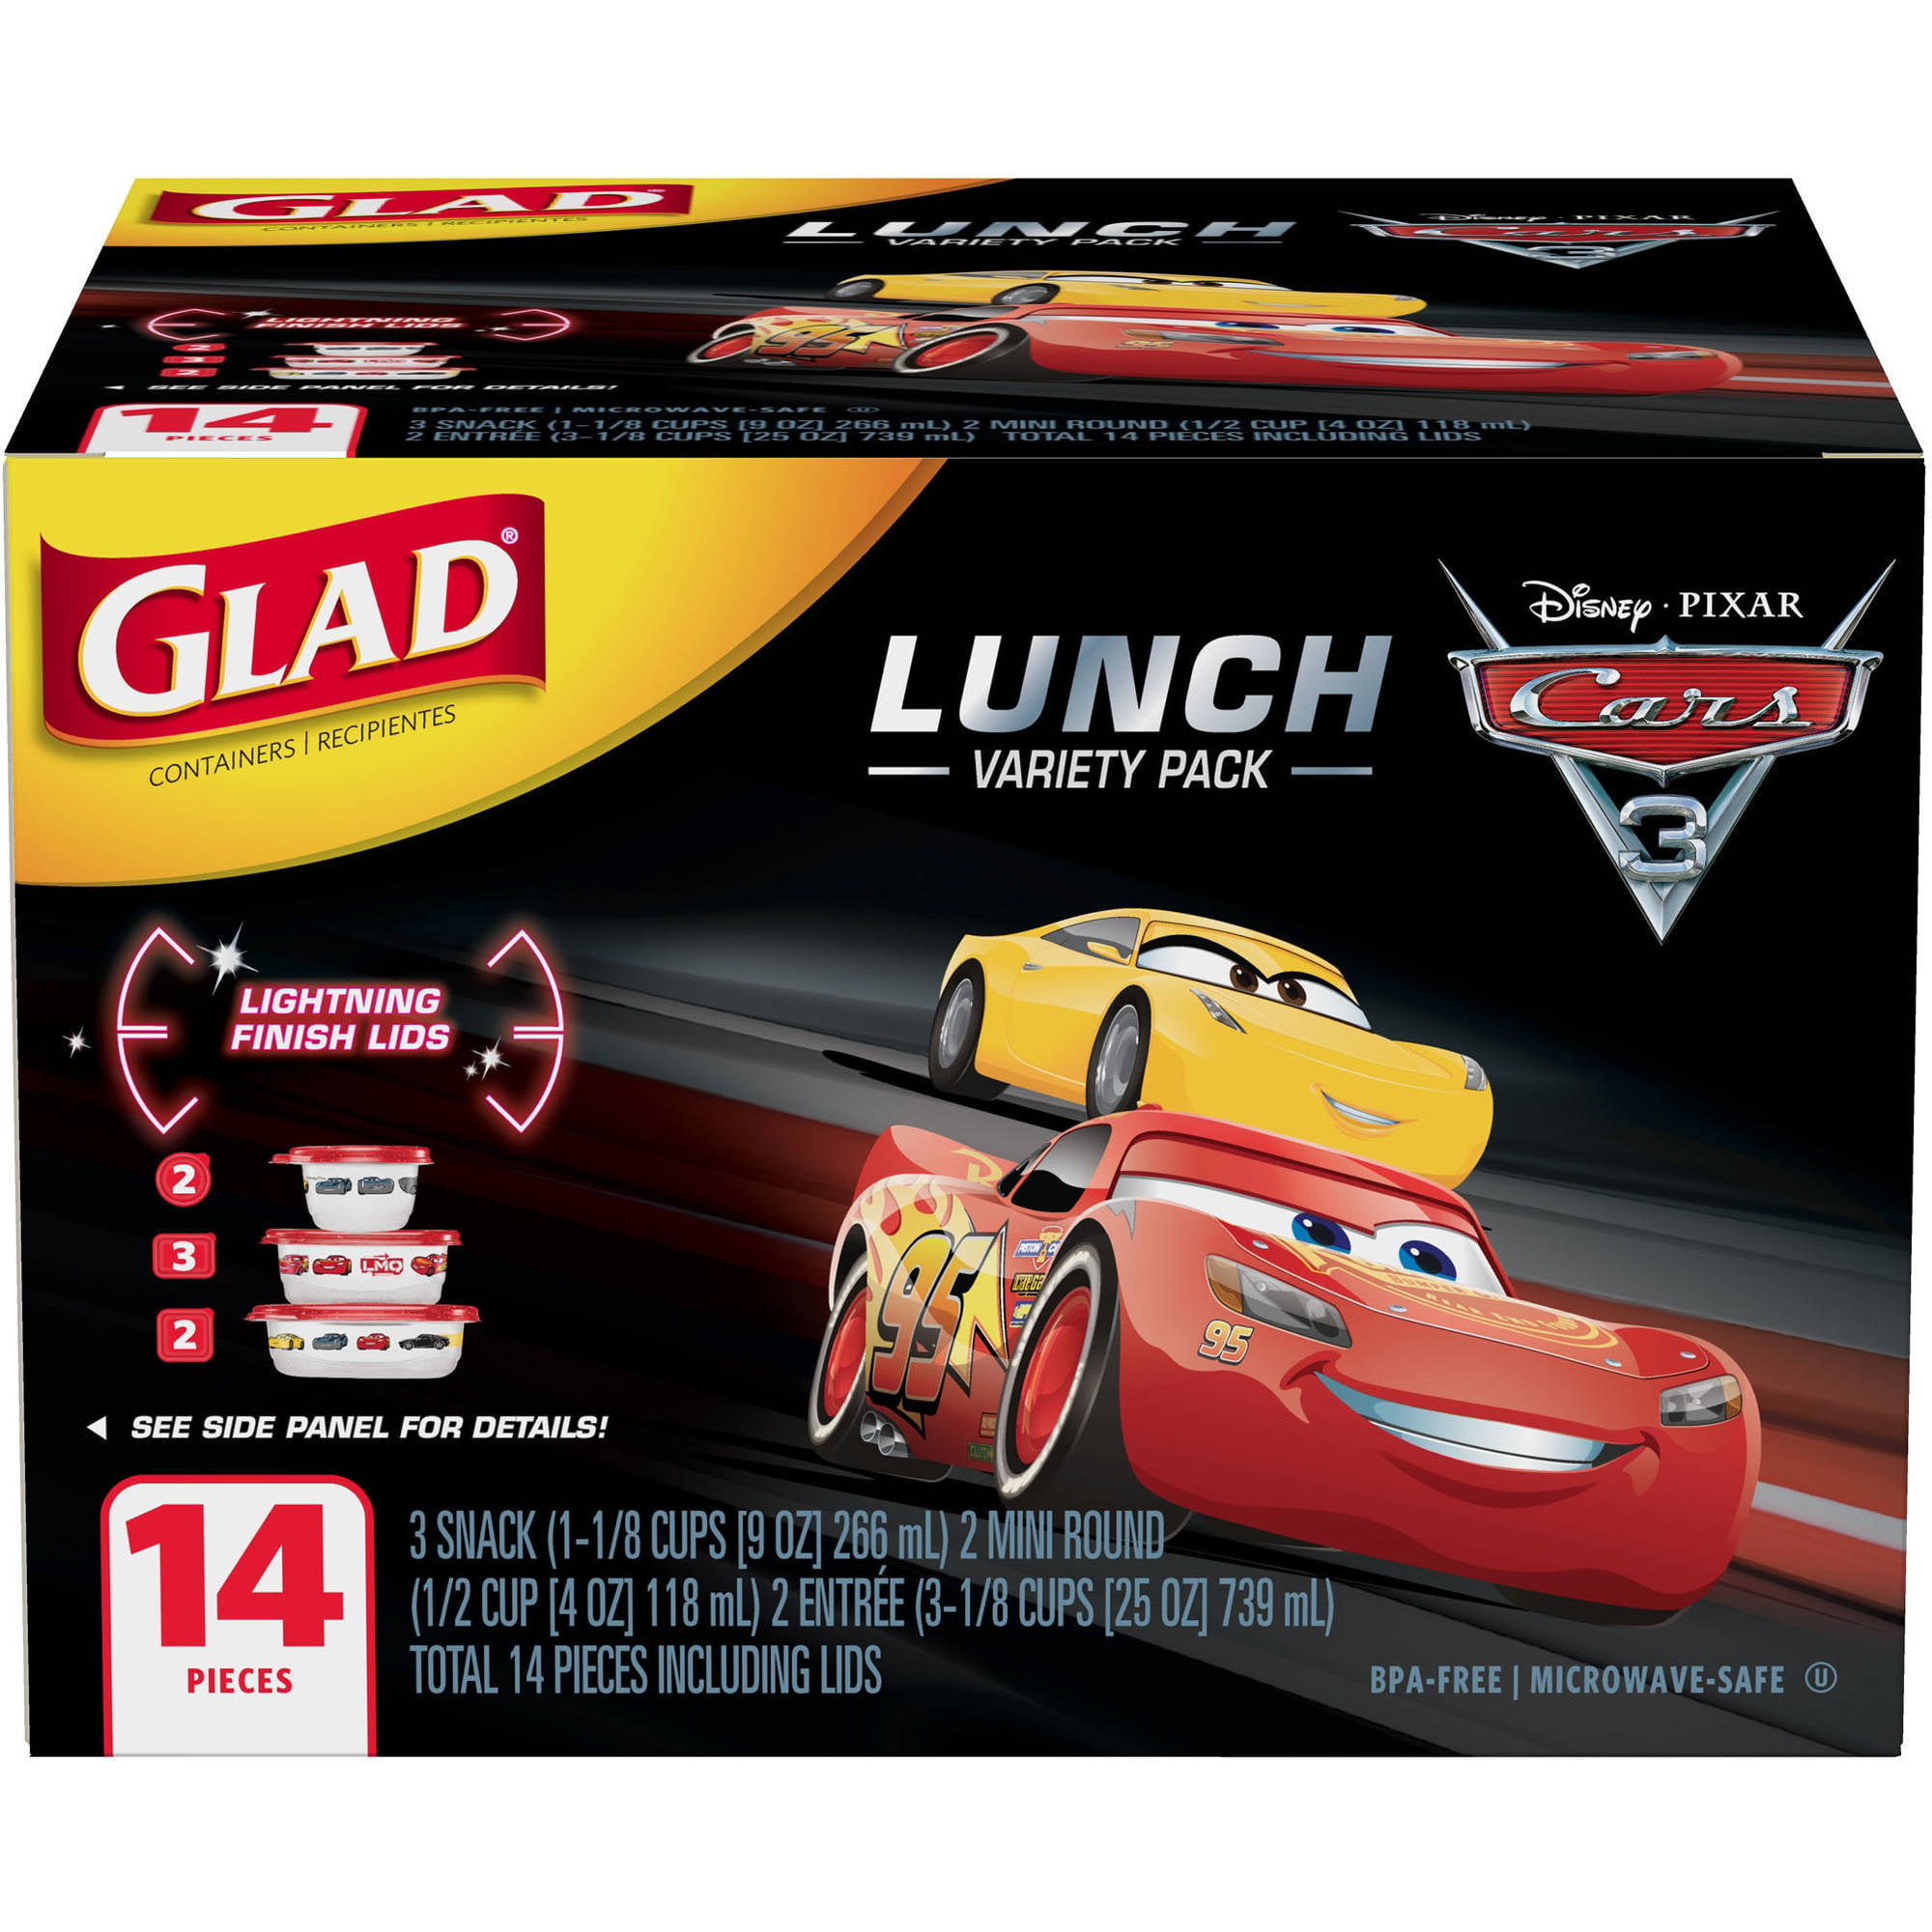 Glad Home Collection Containers & Lids, Small Snack, Square, 9